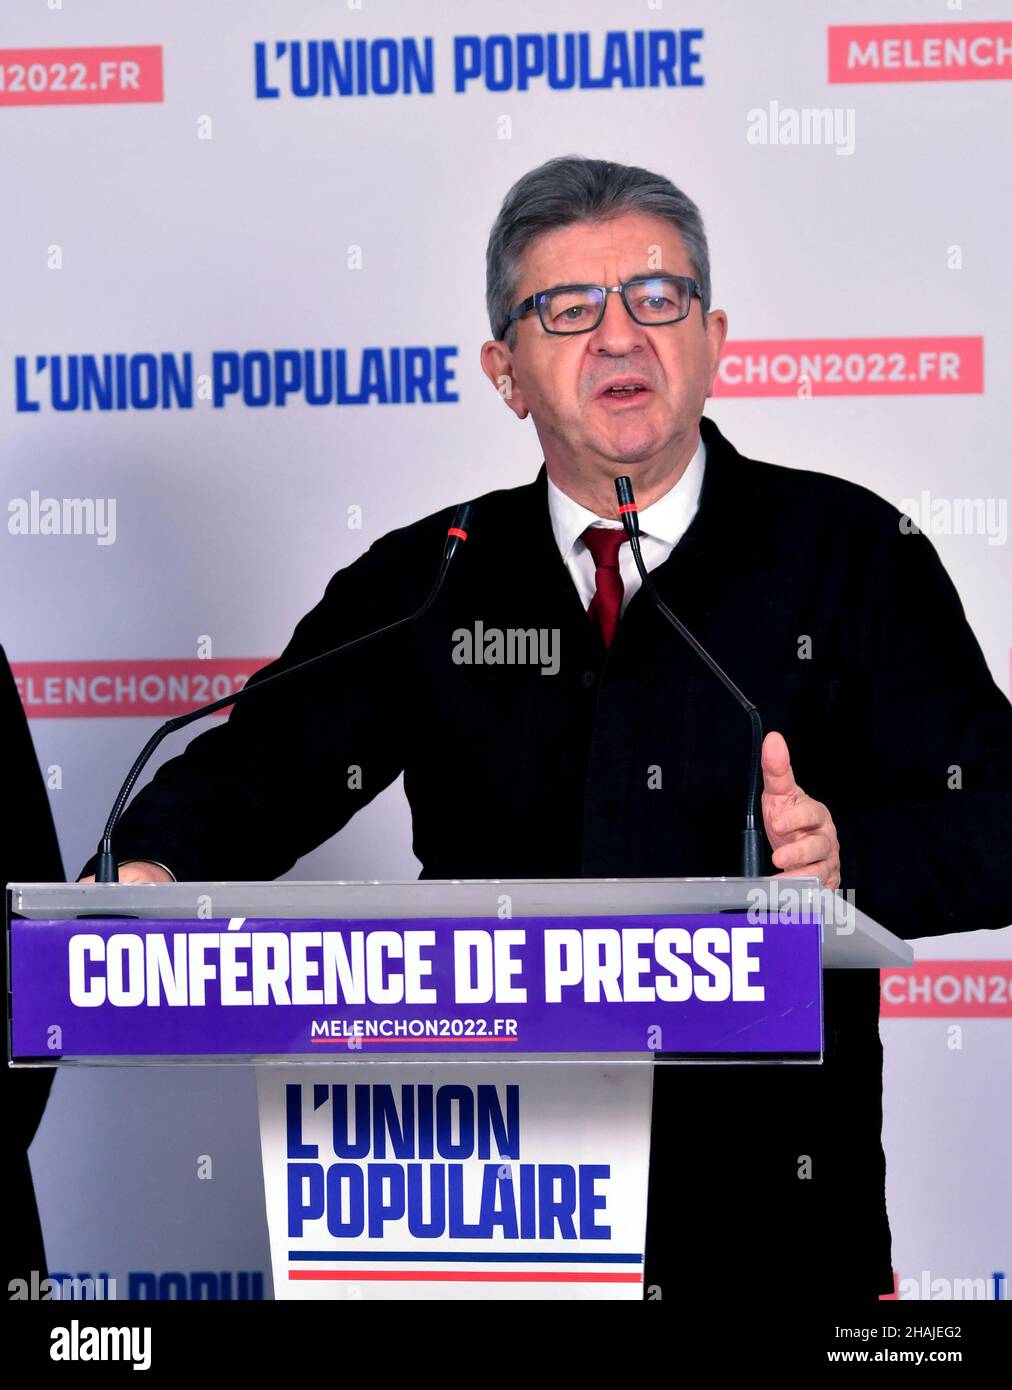 La France Insoumise leader Jean-Luc Melenchon during a press conference on  the presidential campaign, in Paris, France, on December 13, 2021. Melenchon  launches his 'Popular Union' against the far right. Photo by